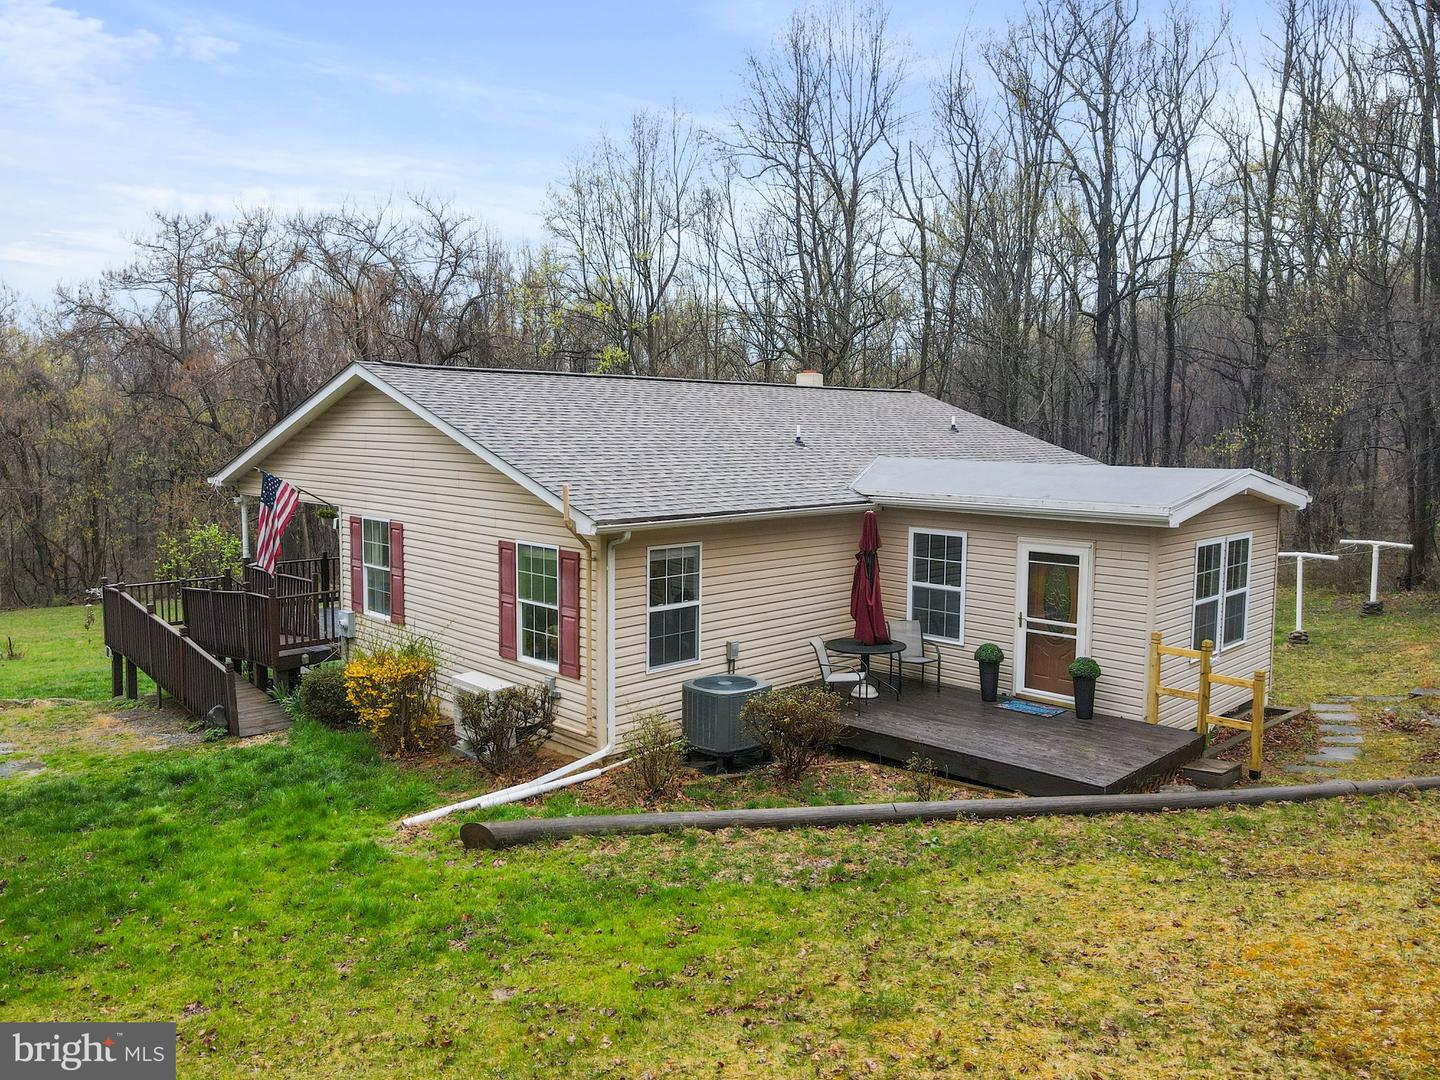 12494 HARPERS FERRY RD, HILLSBORO, Virginia 20132, 2 Bedrooms Bedrooms, ,3 BathroomsBathrooms,Residential,For sale,12494 HARPERS FERRY RD,VALO2066838 MLS # VALO2066838